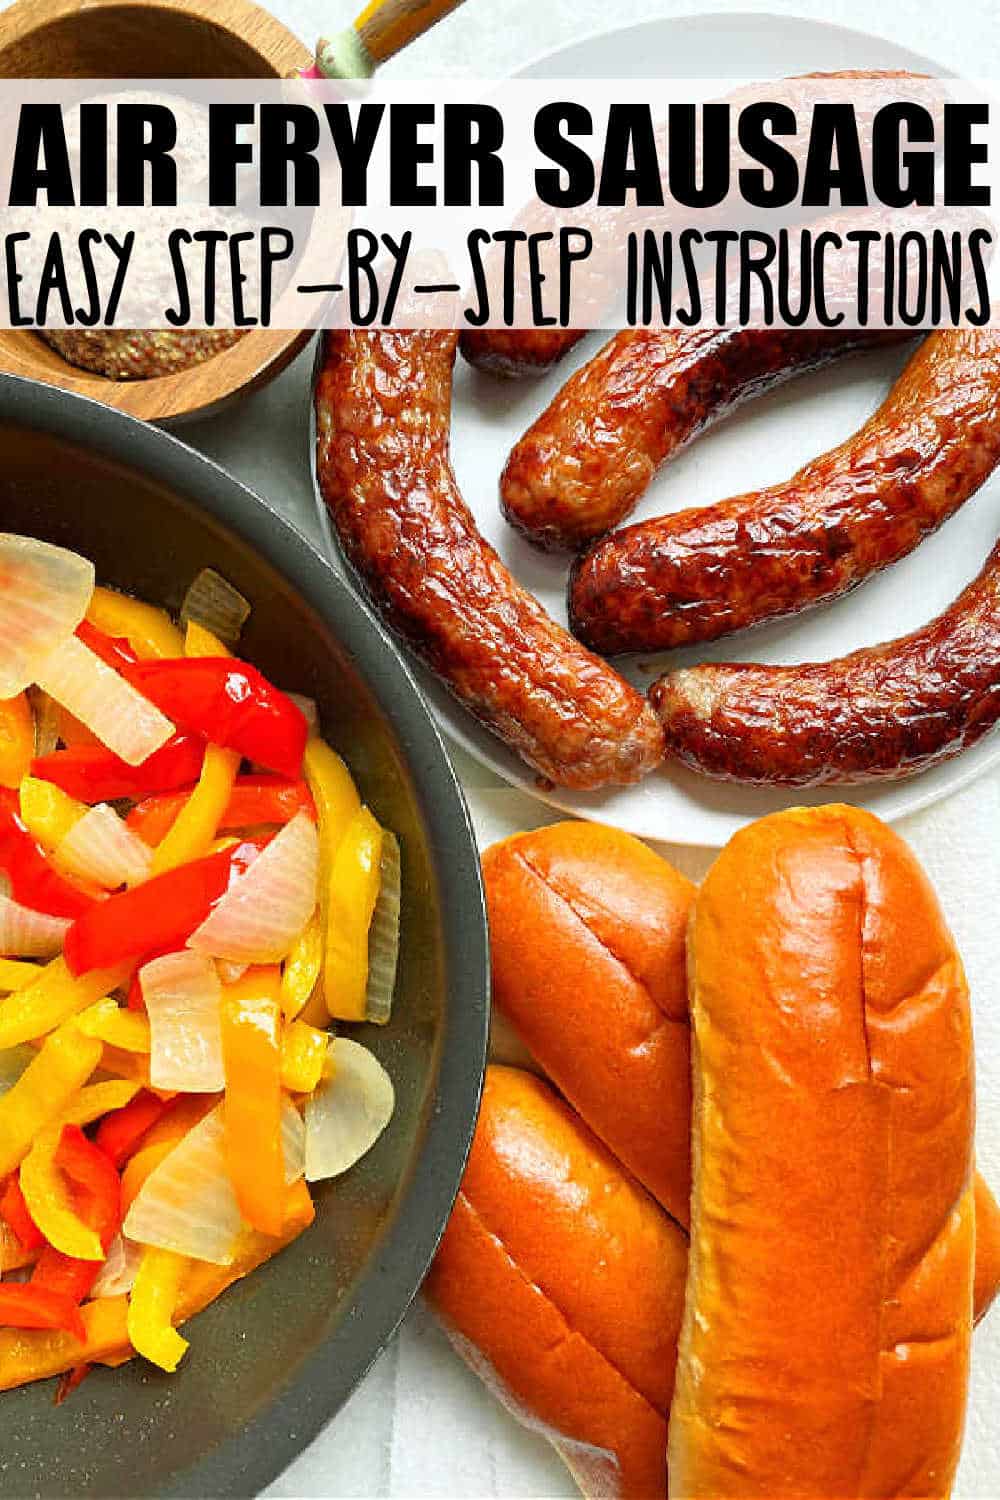 Enjoy easy Air Fryer Sausage for any occasion. Your air fryer is the hands off way to cook Bratwurst, Italian sausage or any other variety. via @foodtasticmom